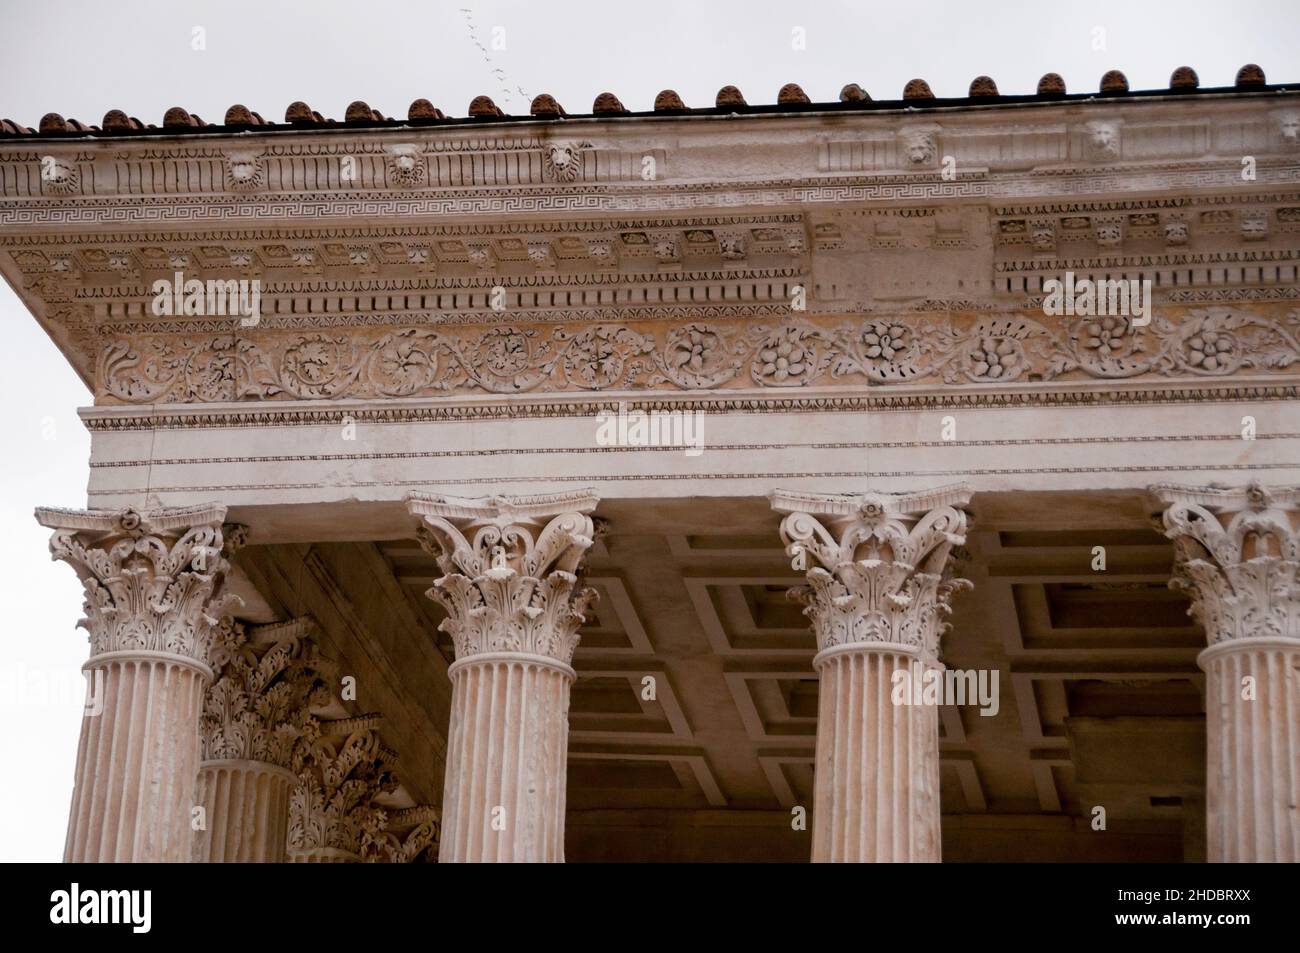 Frieze and Corinthian capitals of Maison Carrée in Nîmes, France. Stock Photo